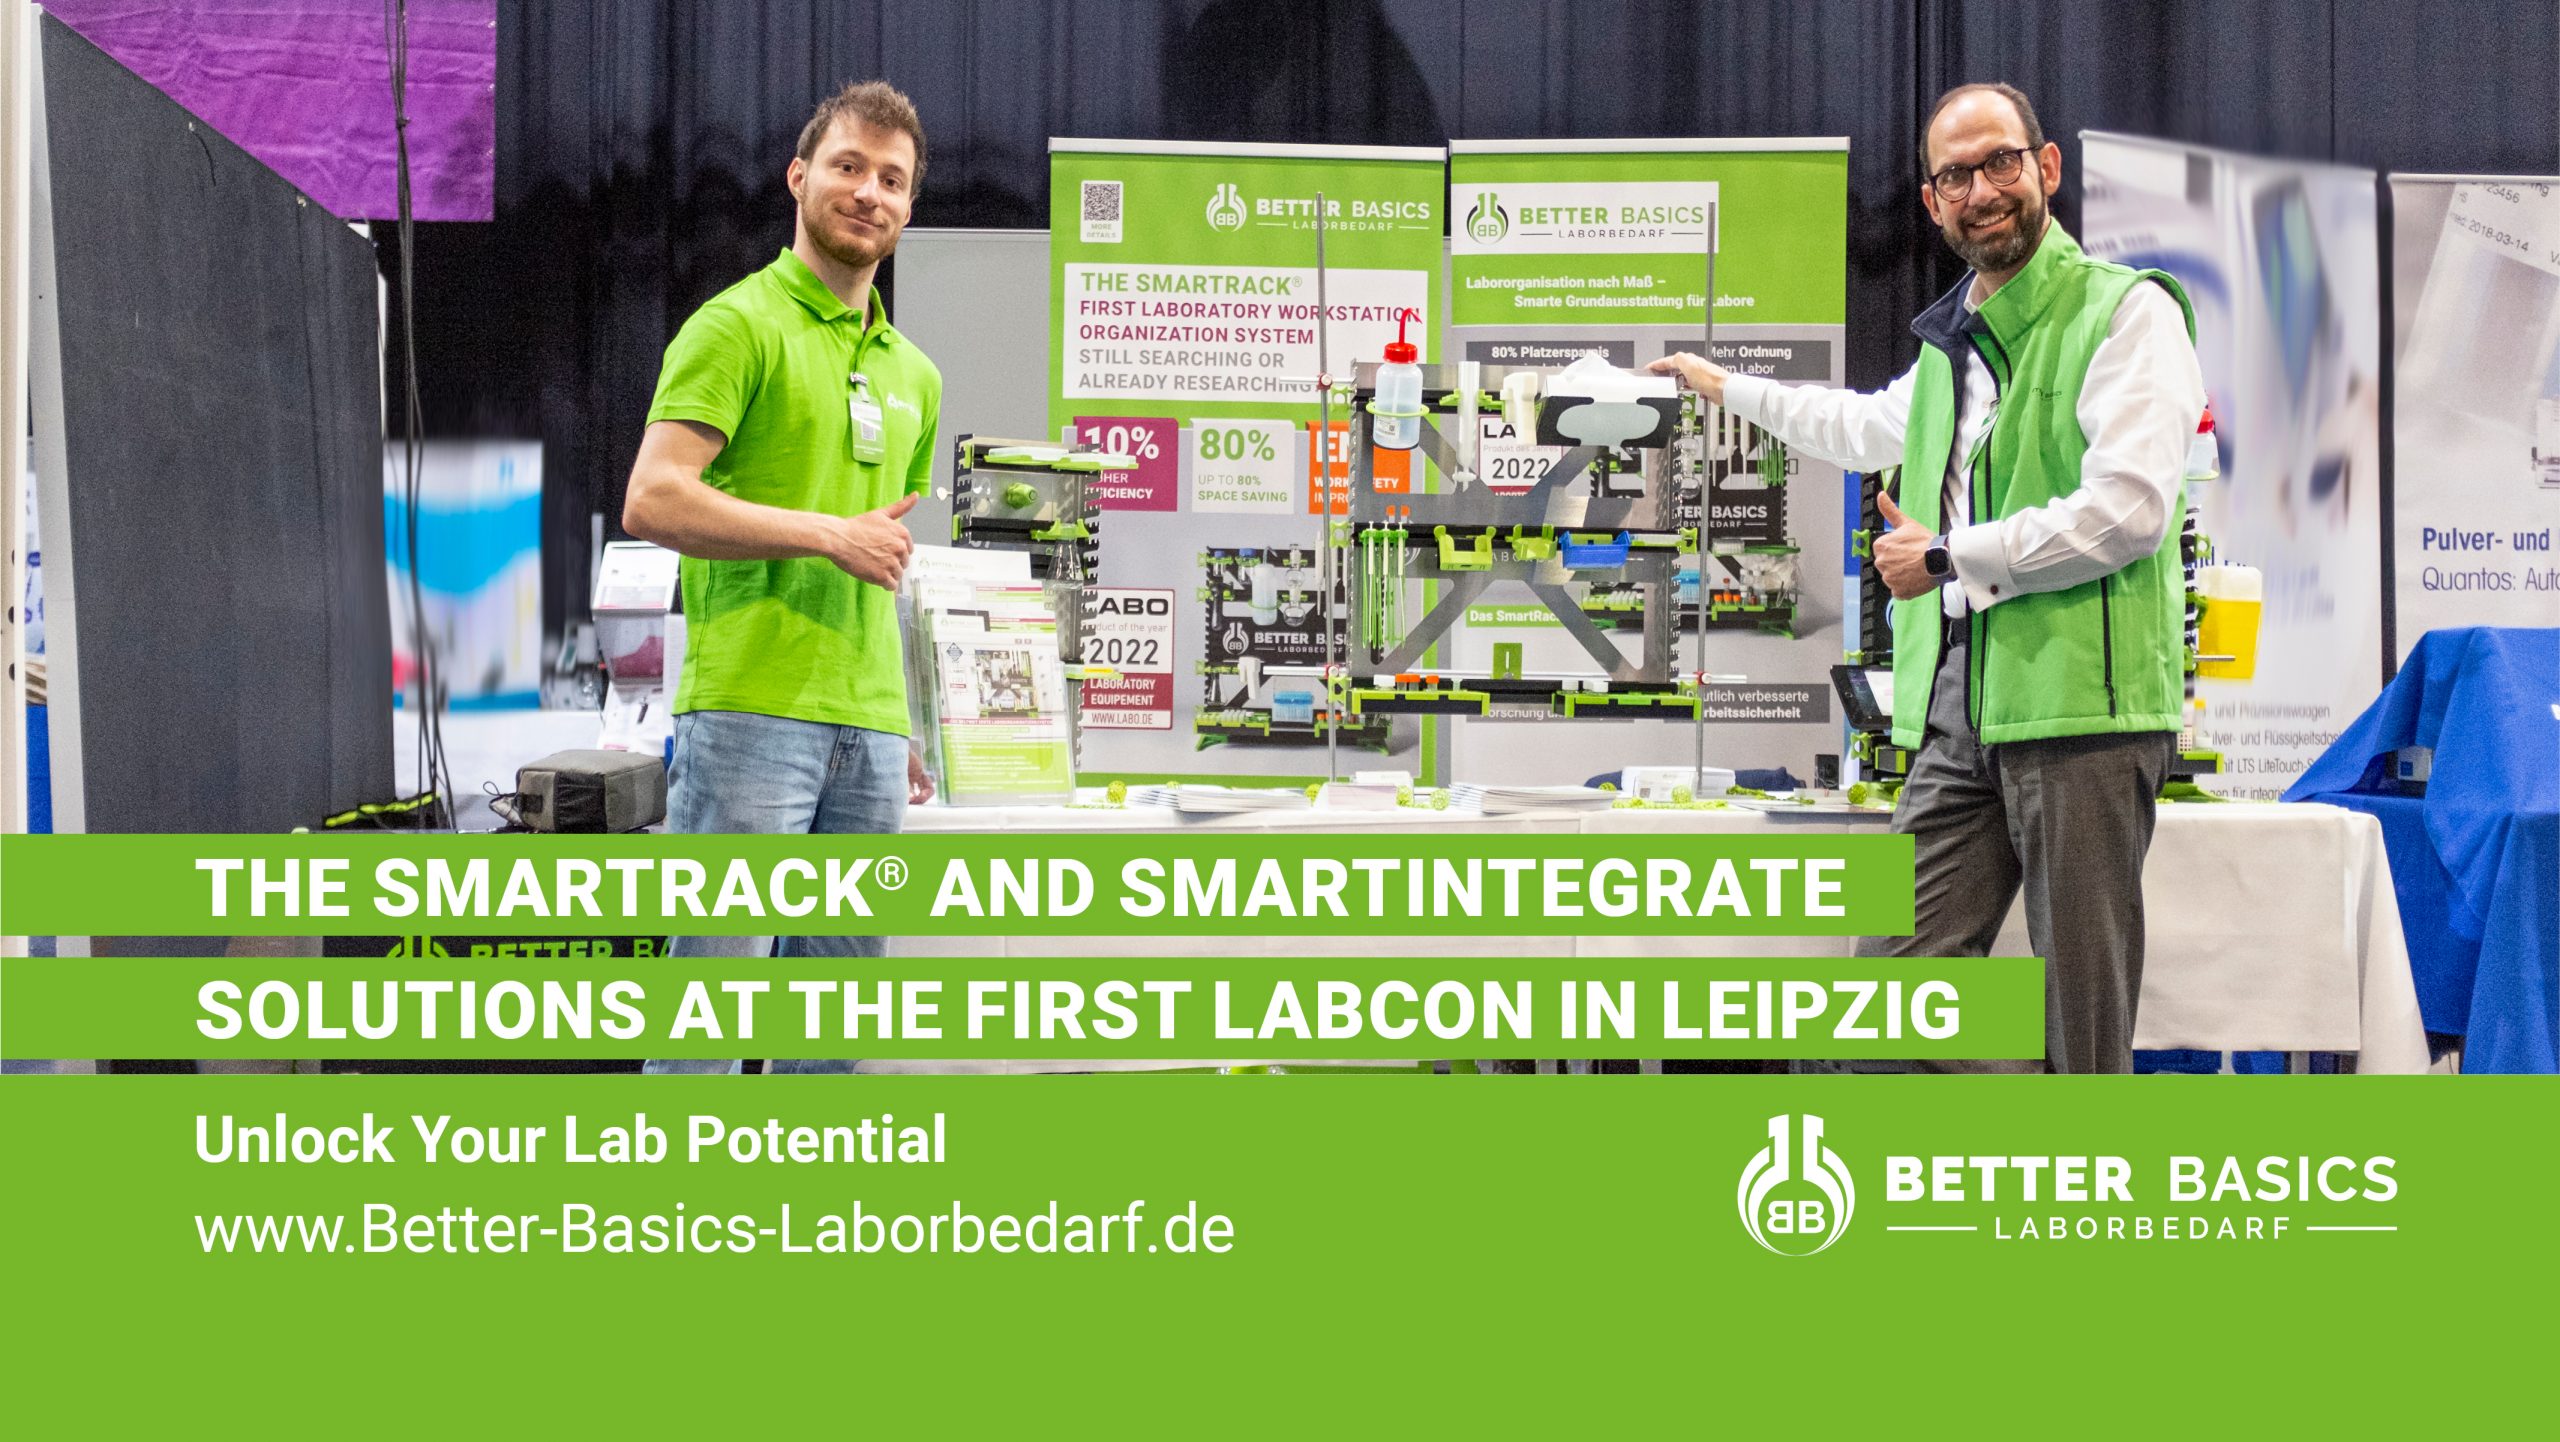 The SmartRack® and SmartIntegrate solutions at the first LabCon in Leipzig, Germany